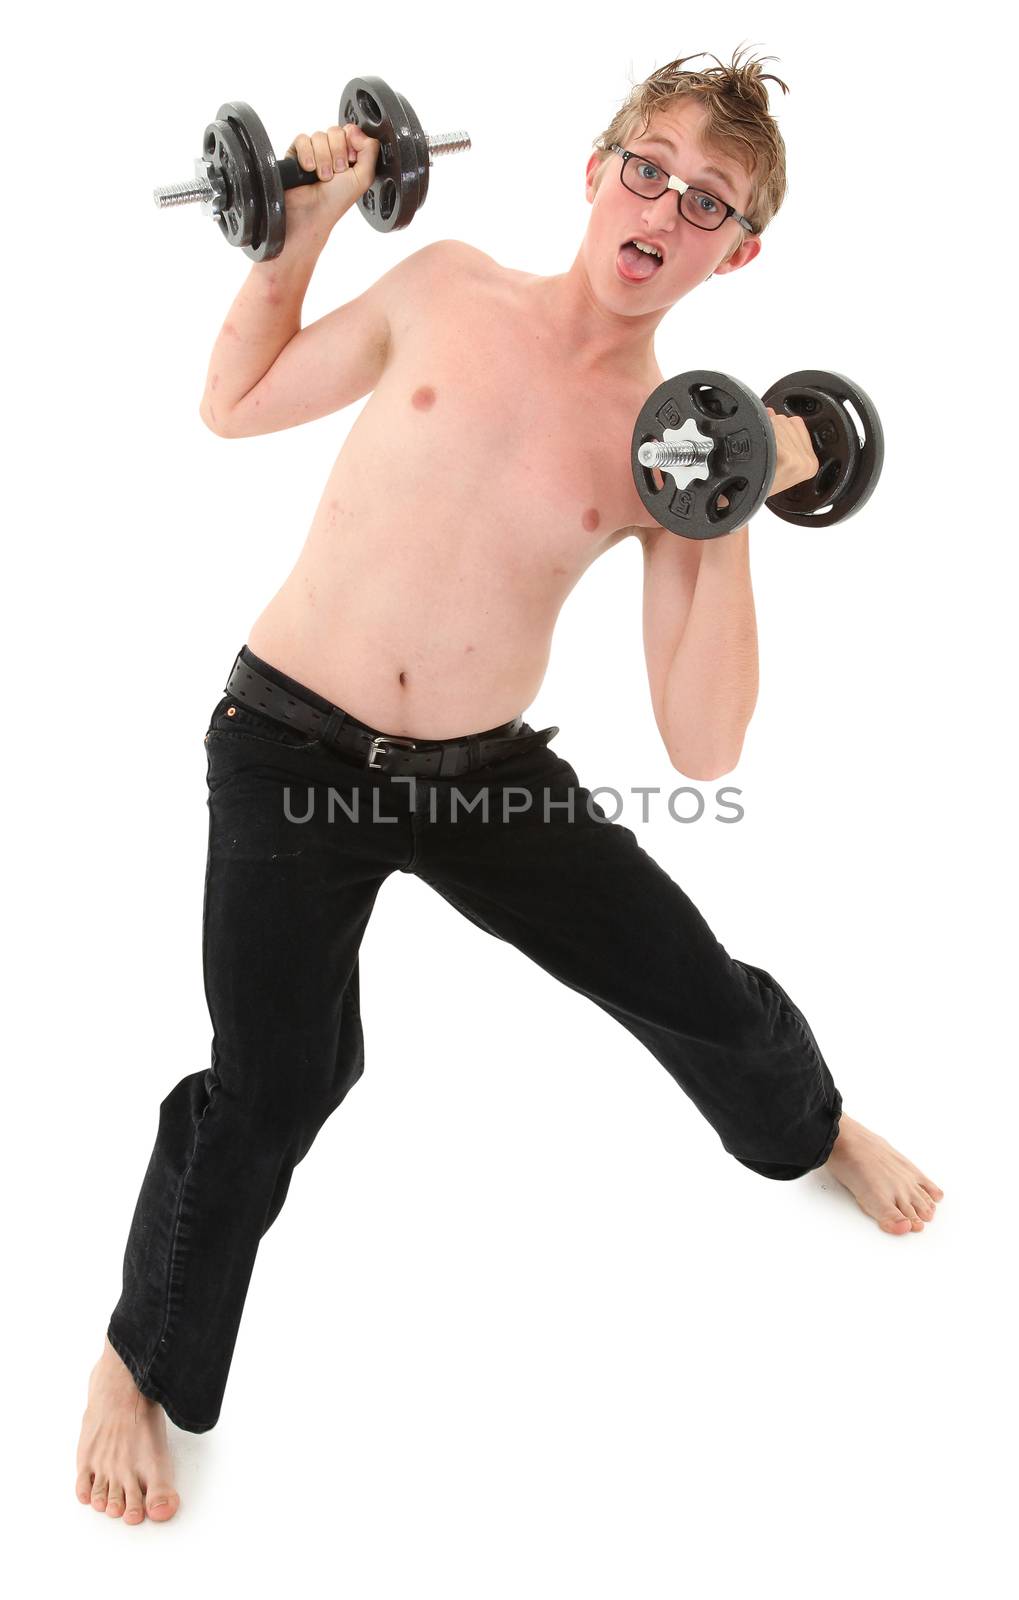 Humorous weightlifting workout images with adorable teen boy. Clipping path over white. 